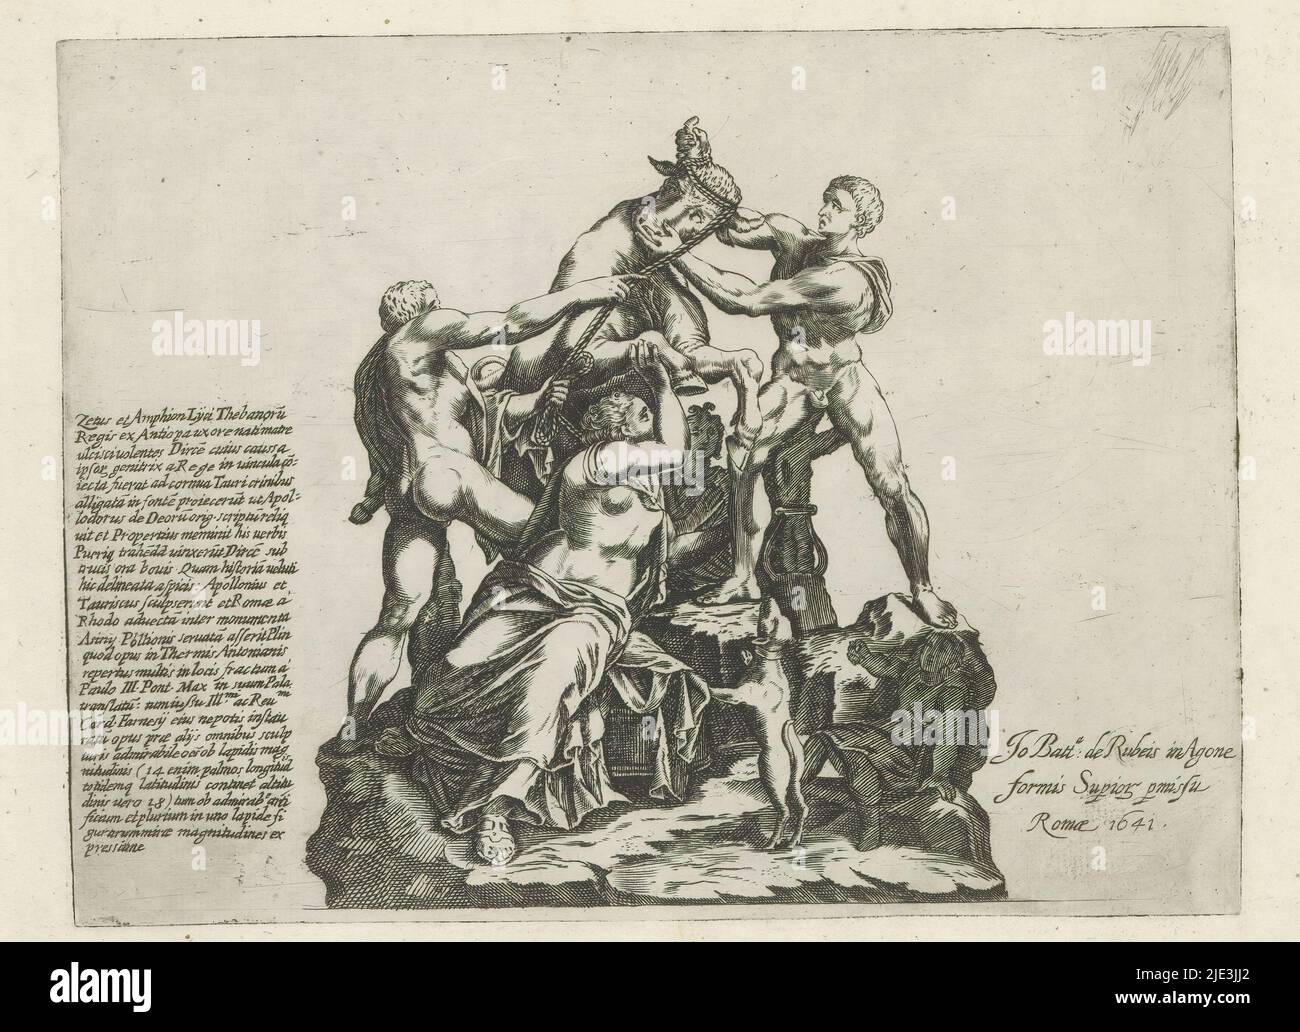 Dirce being tied to a bull, Farnese Bull, Sculptures of Antiquity (series title), Ancient sculpture known as the Farnese Bull. The brothers Amphion and Zethus tie the braided hair of Dirce to the horns of a bull. Caption in Latin. Print is part of an album., print maker: anonymous, publisher: Giovanni Battista de'Rossi, (mentioned on object), publisher: Antonio Salamanca, (rejected attribution), print maker: Italy, publisher: Rome, publisher: Rome, Vaticaanstad, 1538 and/or 1641, paper, engraving, height 178 mm × width 235 mm Stock Photo